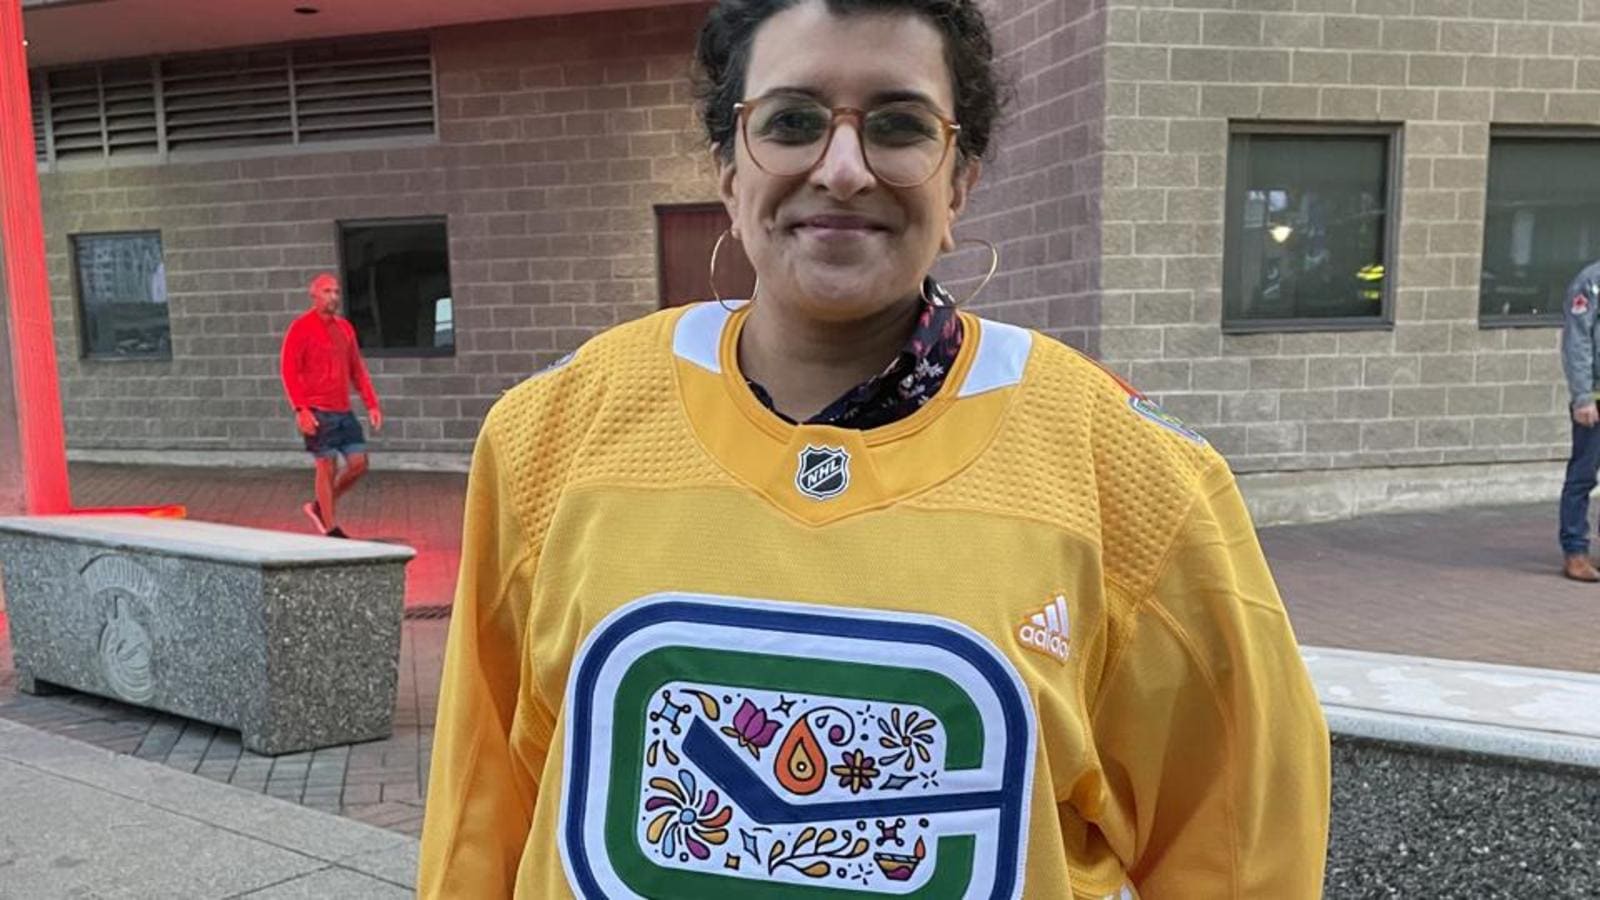 Seth Rogen says he'll trade one of his hand-made vases for Canucks' Diwali-inspired  jersey designed by Jag Nagra — Stir